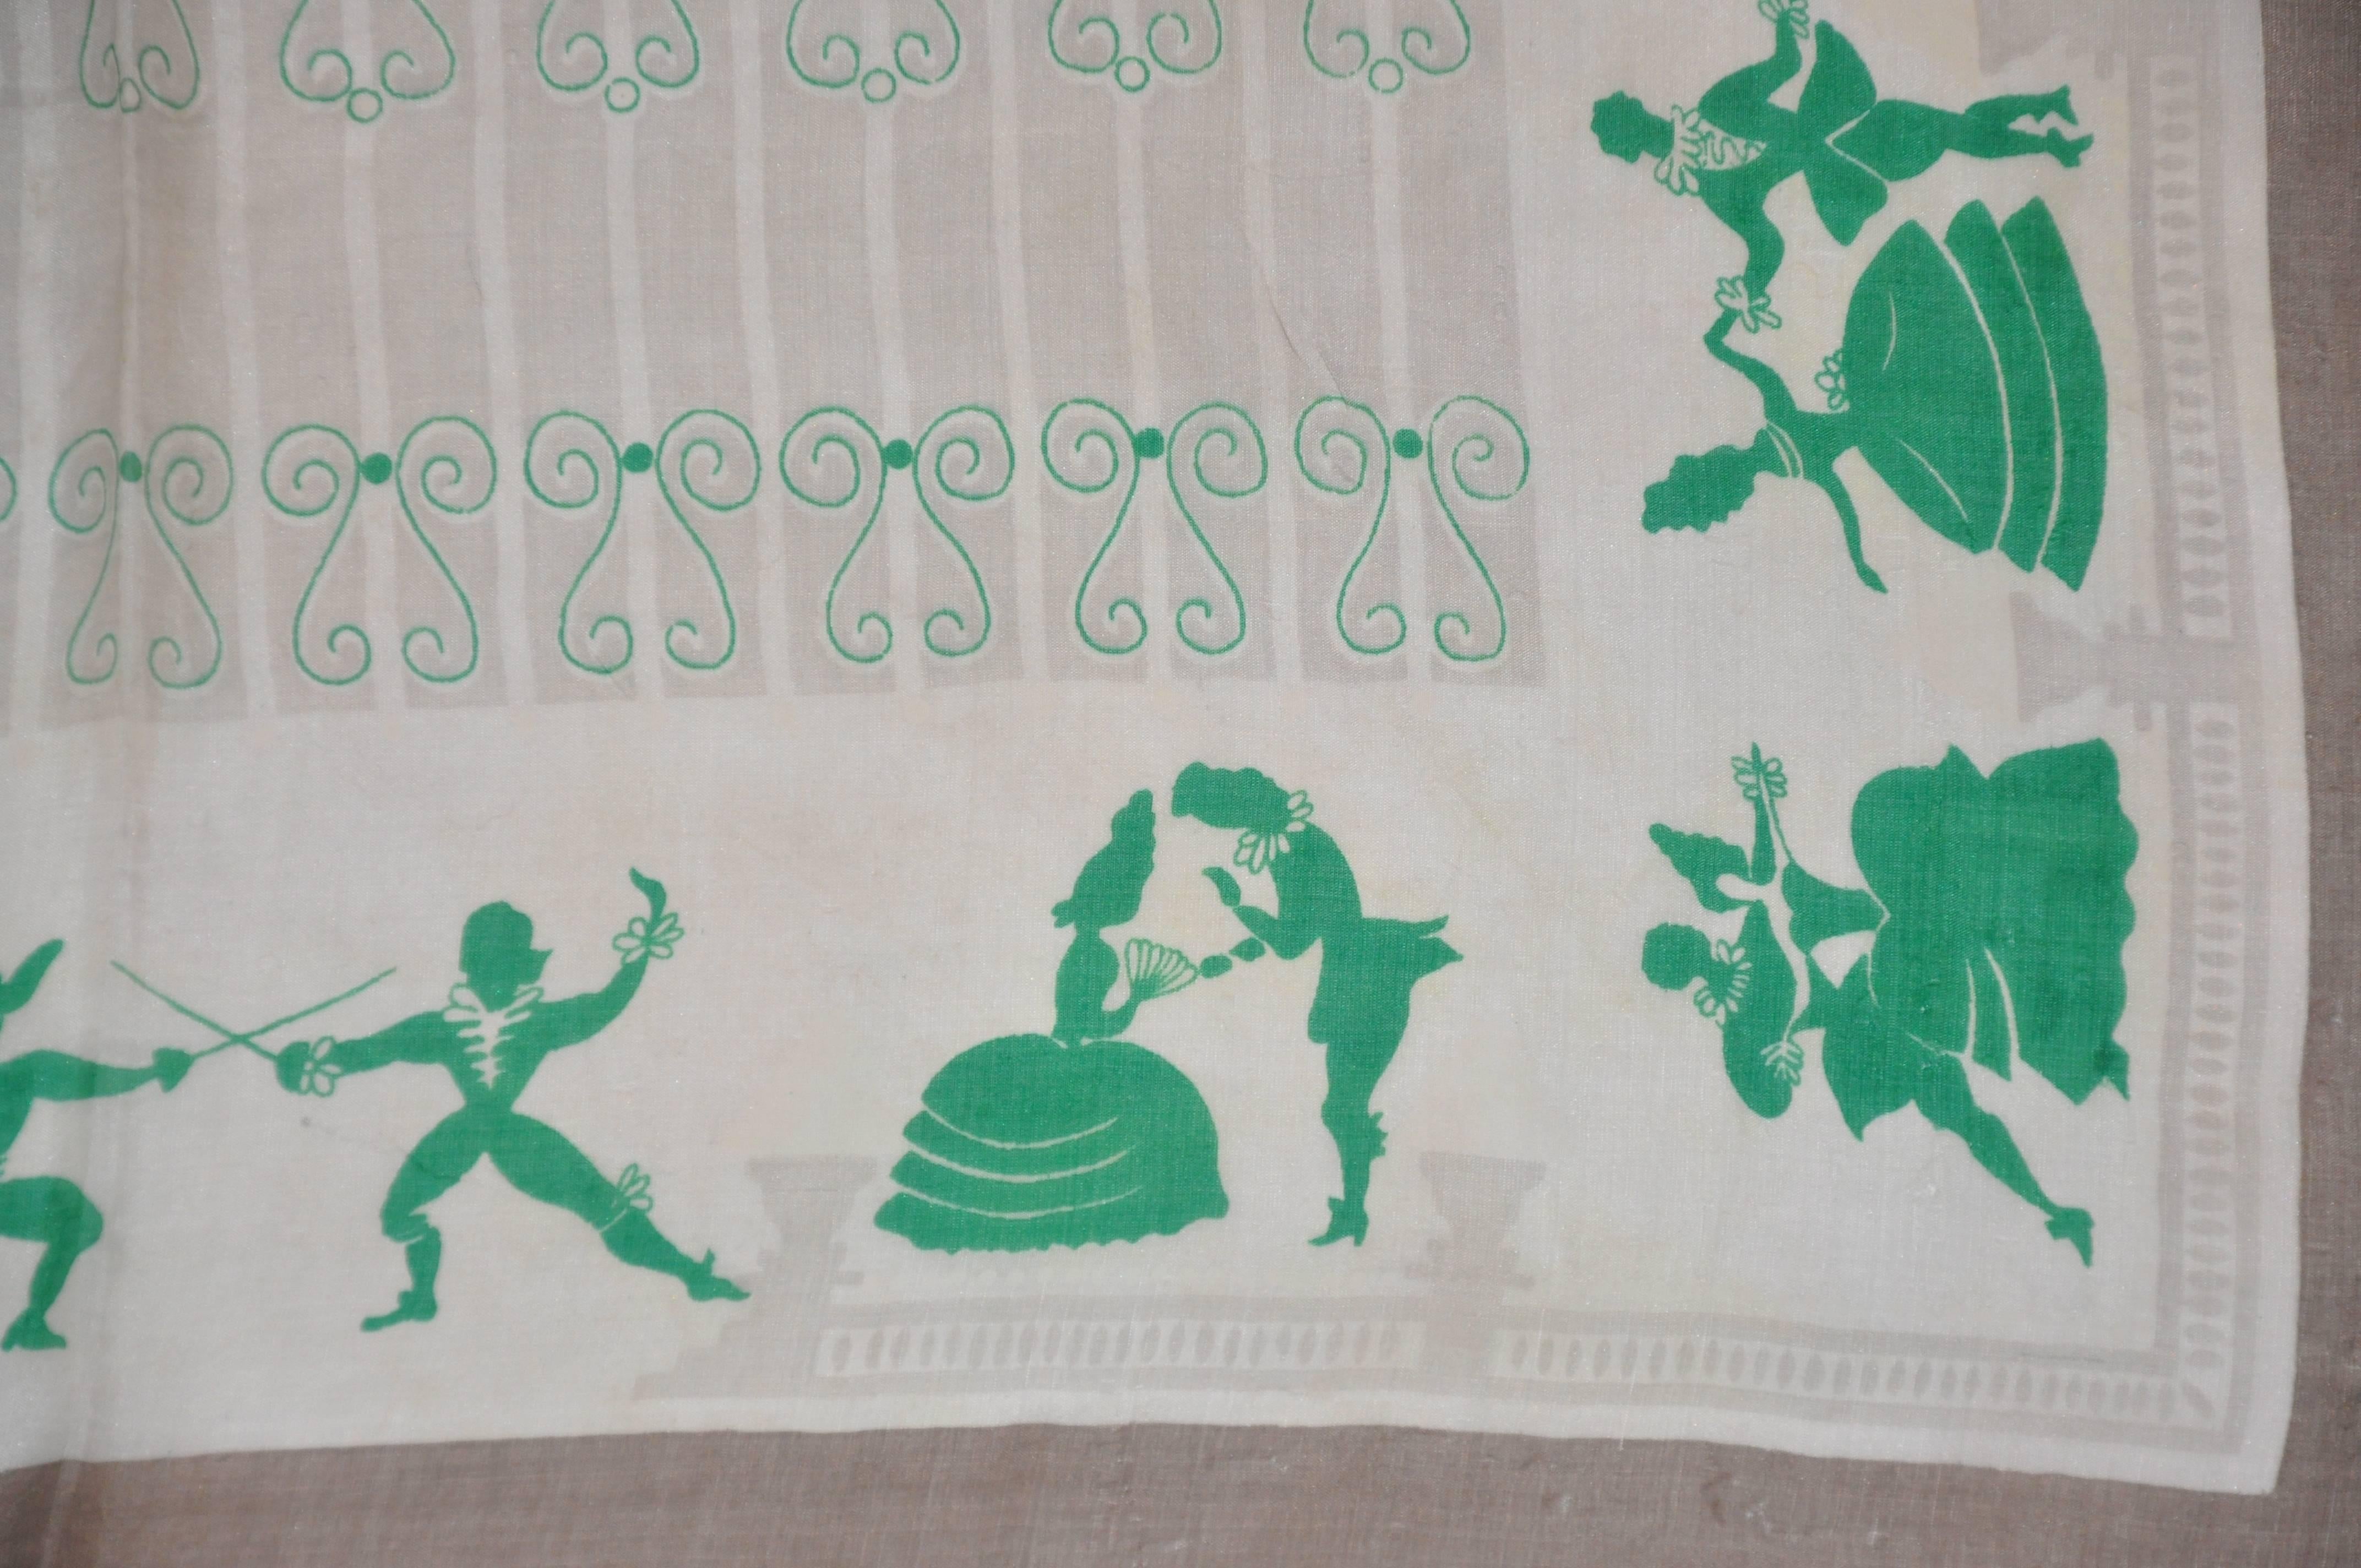 This delicate "Dancing Couple" scarf measures 22 1/2